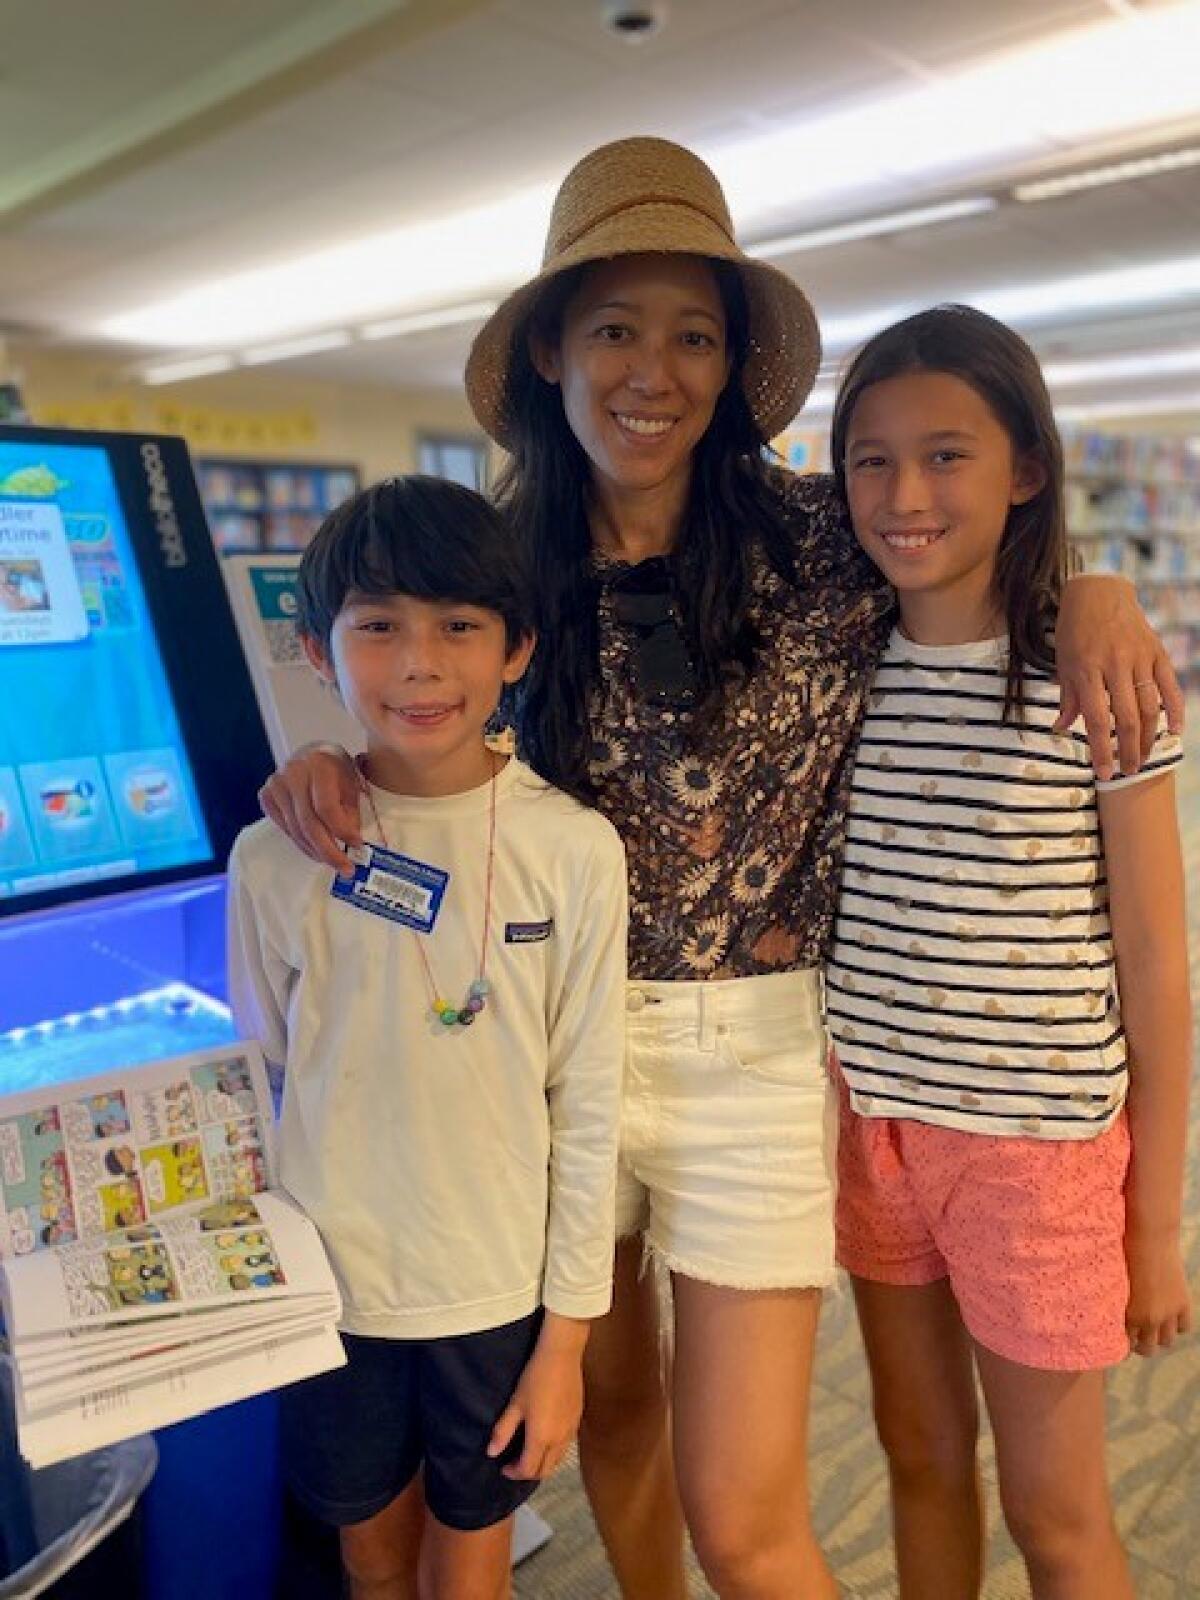 Emily McKinnon and her children Jack, 8, and Nina, 11, visit the La Jolla/Riford Library.